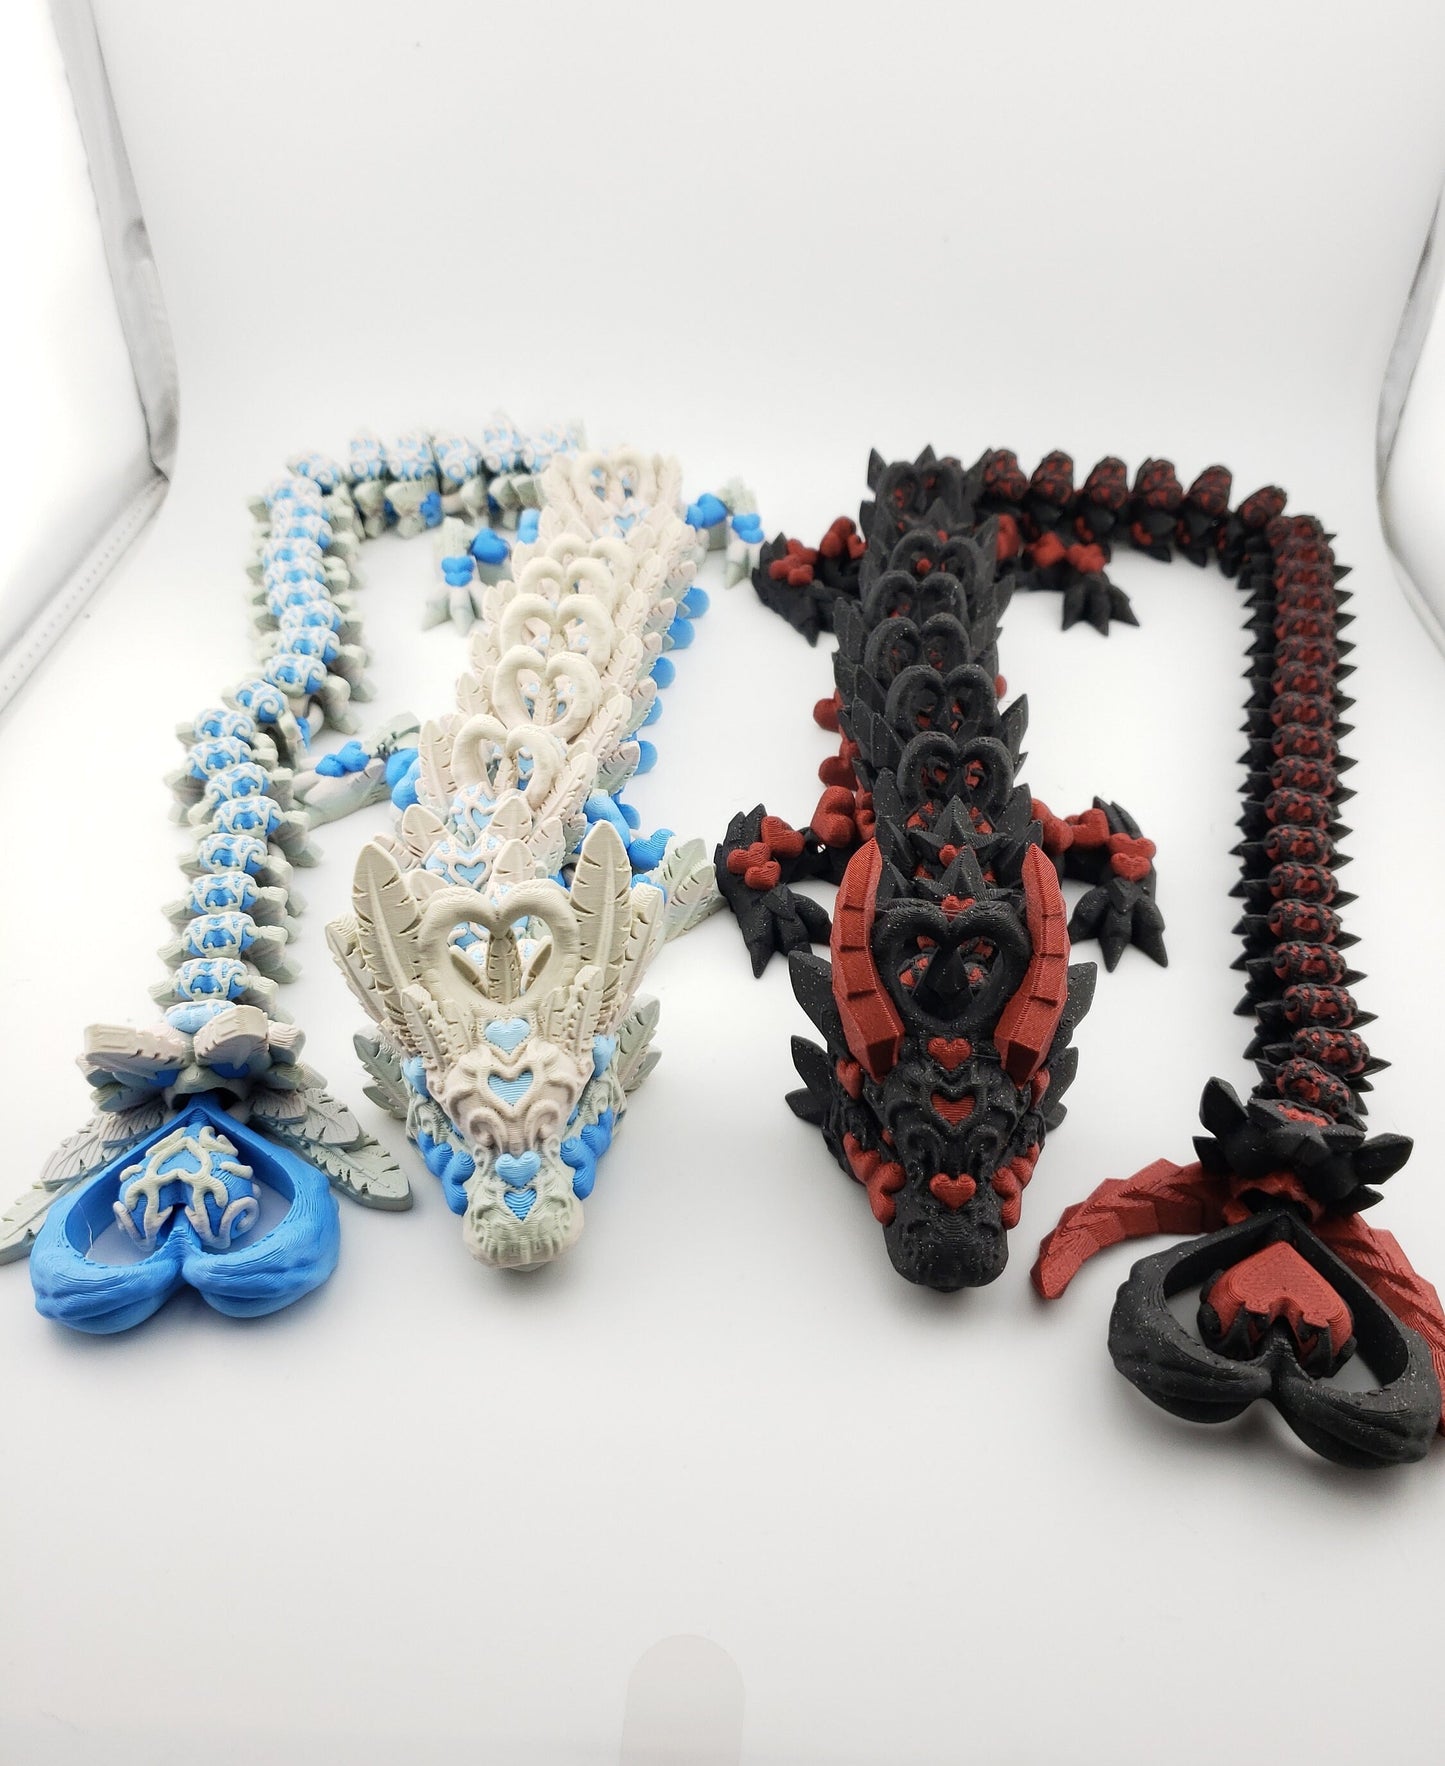 Articulated Light And Dark Dragons - Flexible Sensory Toy - Unique Gift - Desk Decor - Fidget Toy